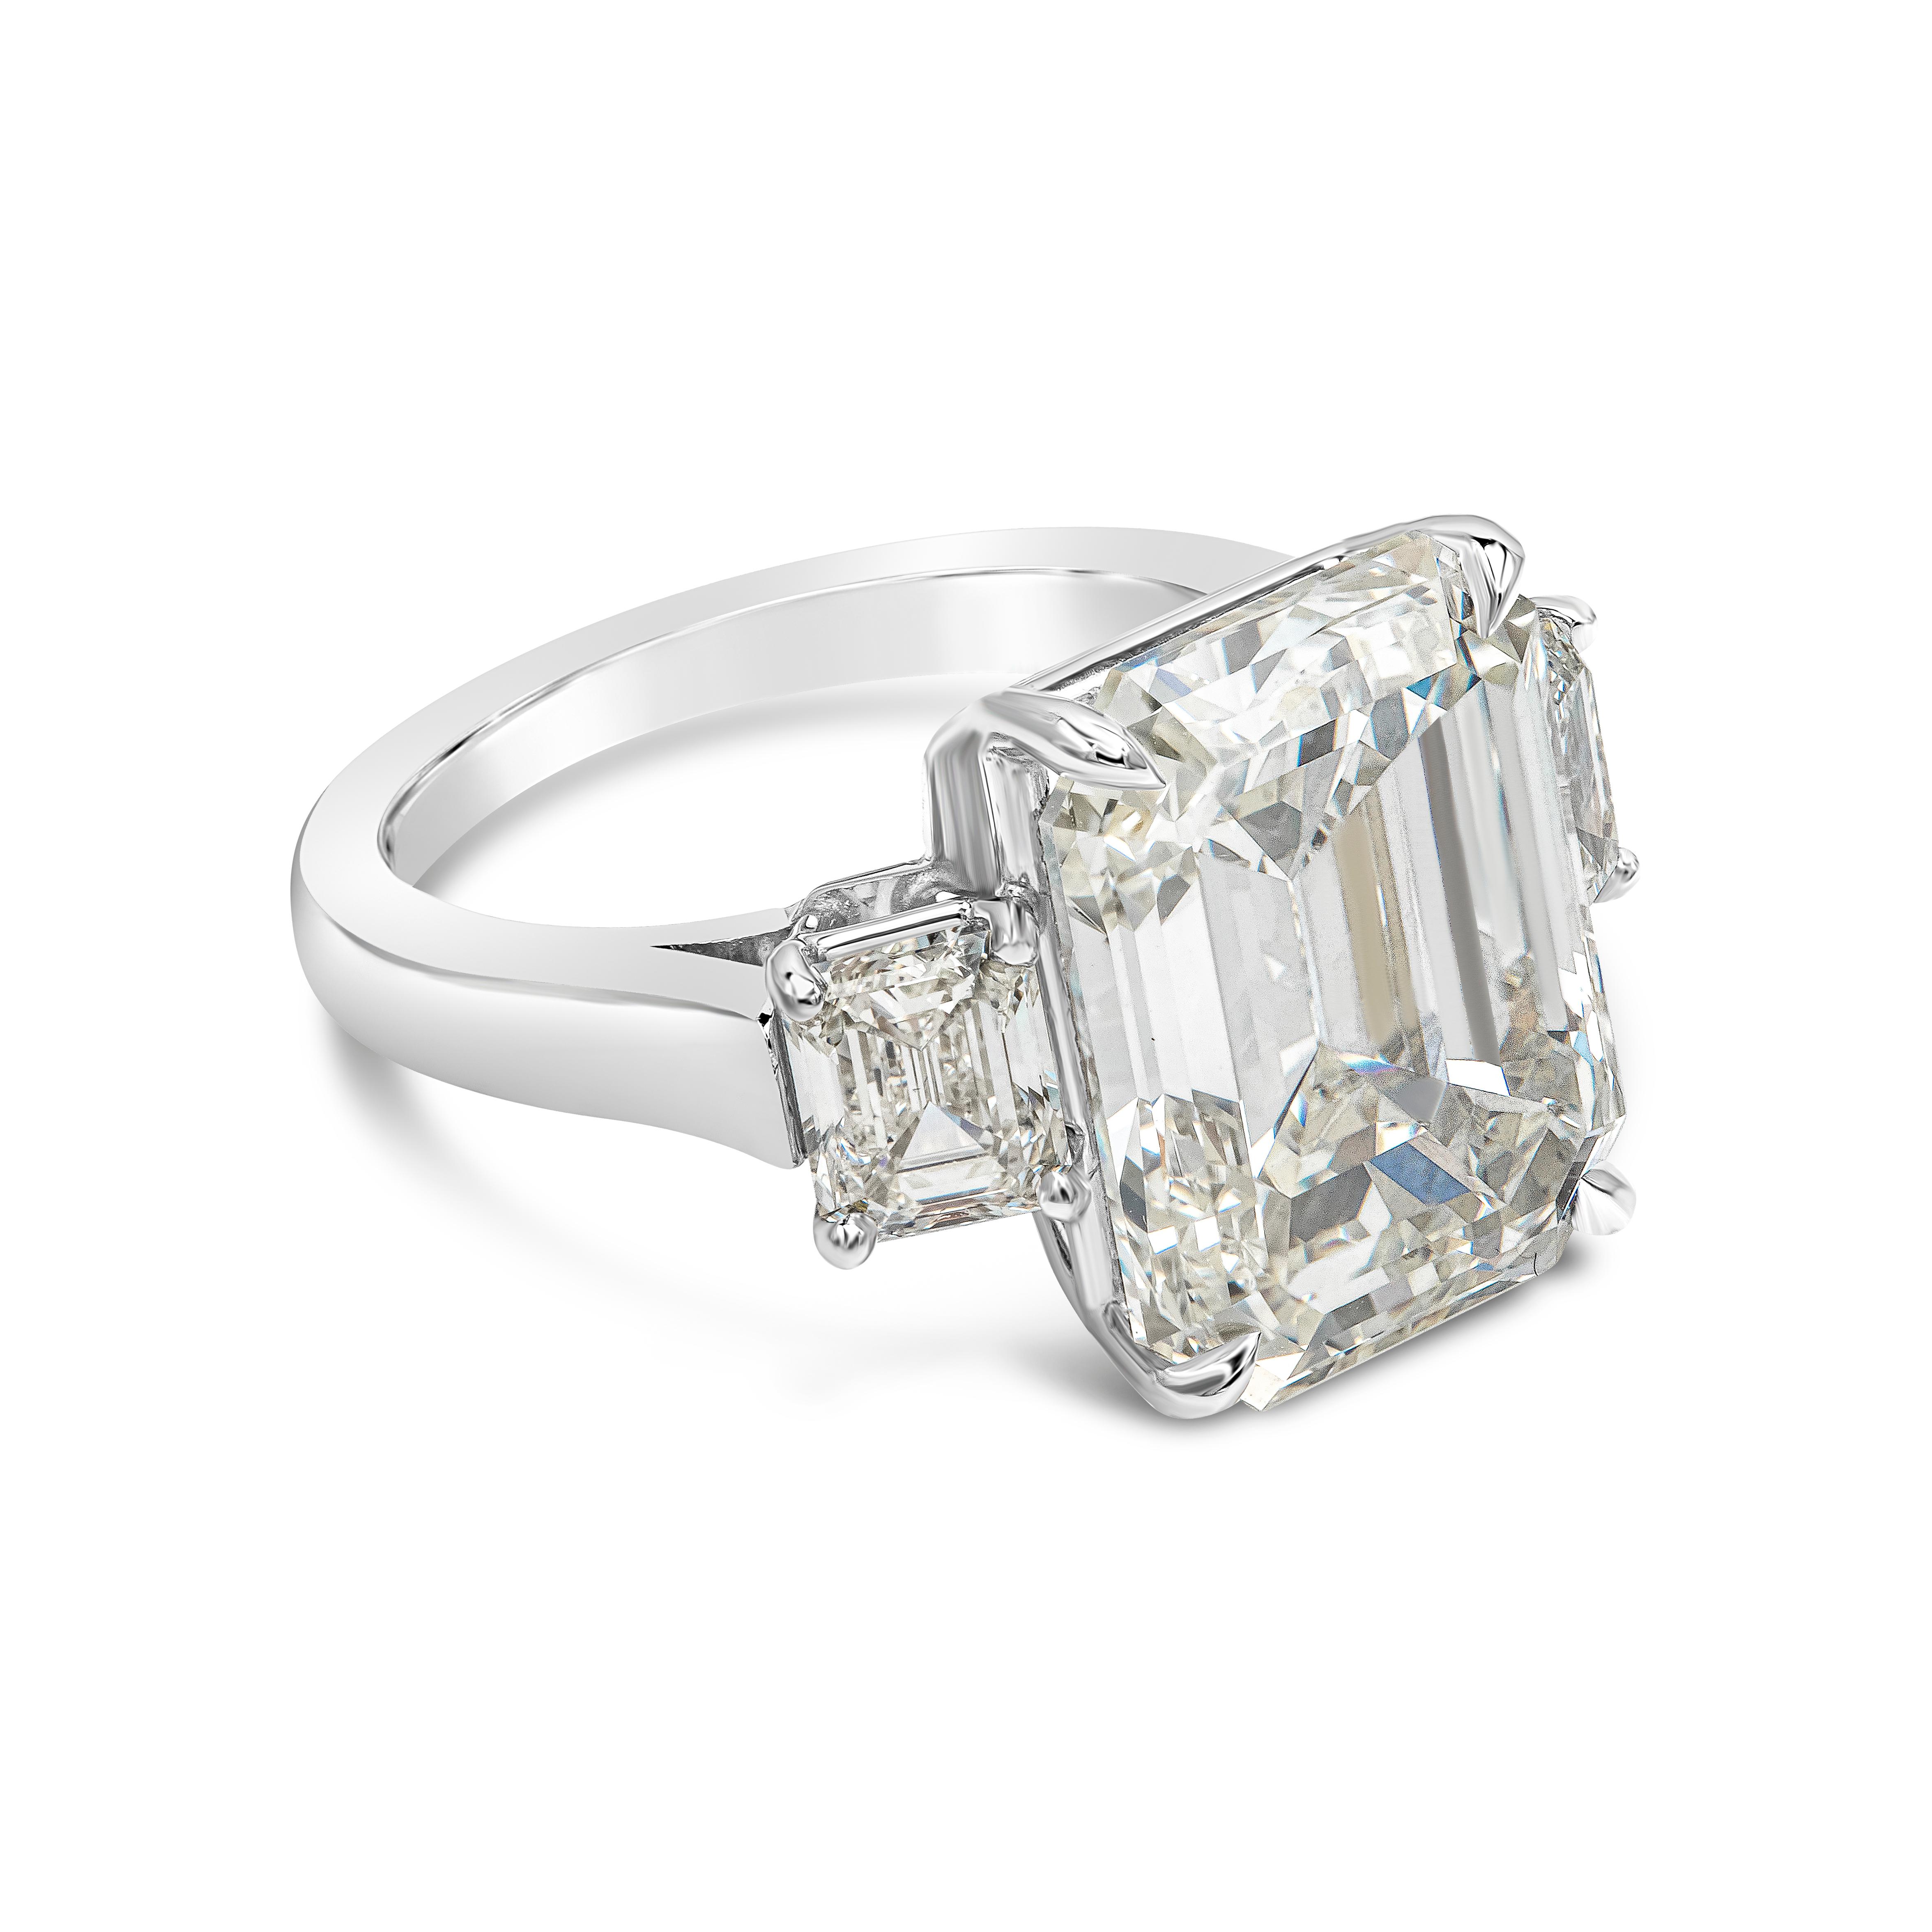 Showcasing a 10.88 carat emerald cut diamond certified by GIA as L color, SI1 clarity, flanked by two small emerald cut diamonds on either side. Accent diamonds weigh 1.45 carats total. Made in platinum. Size 6.75 US (sizable).

Style available in